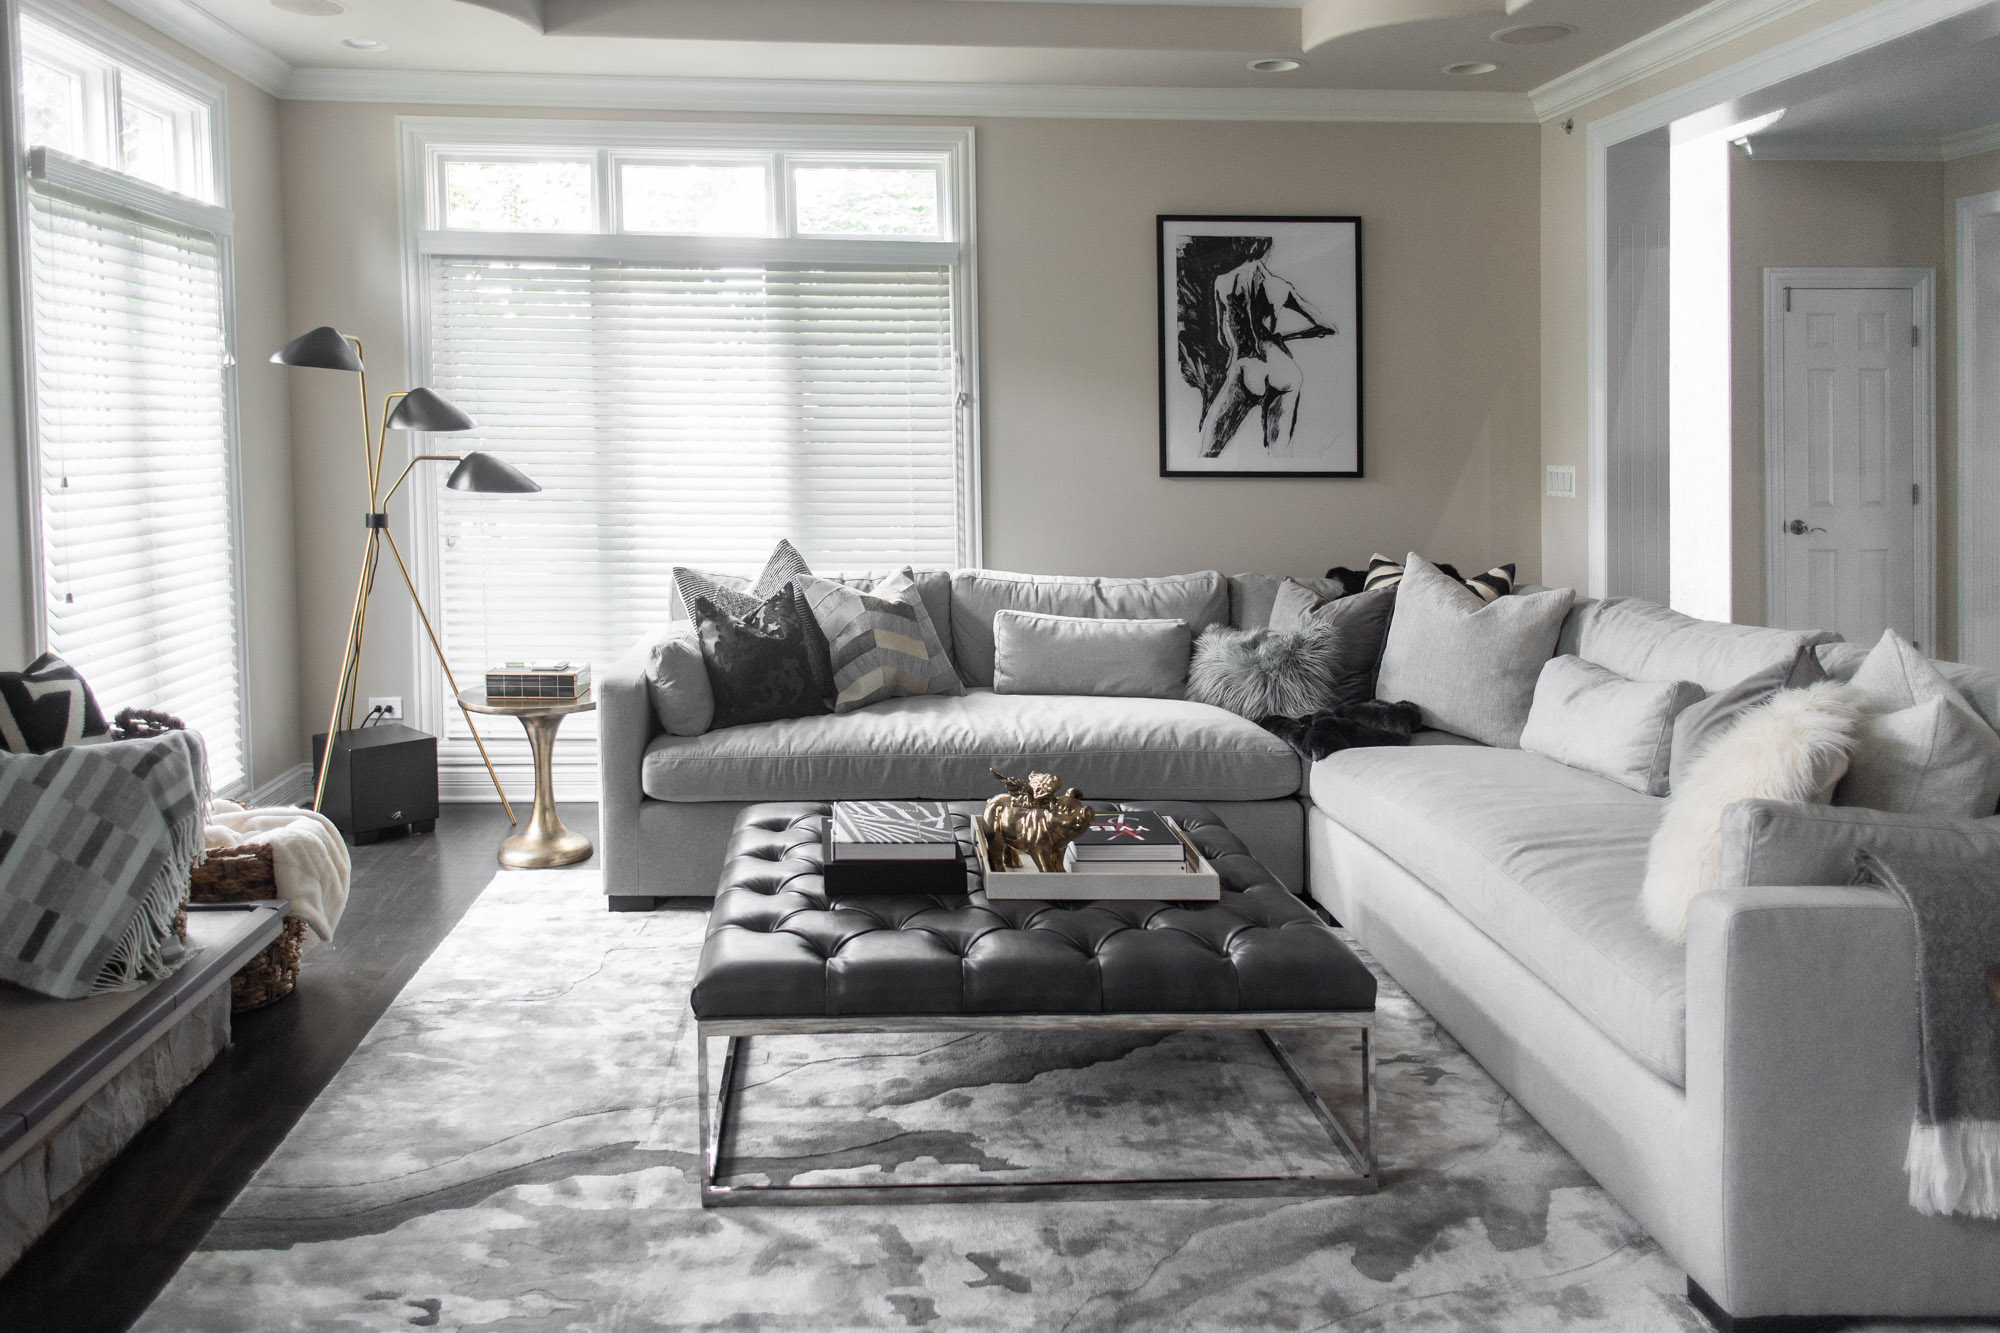 MMDH: Before &amp; After Chic Living Room